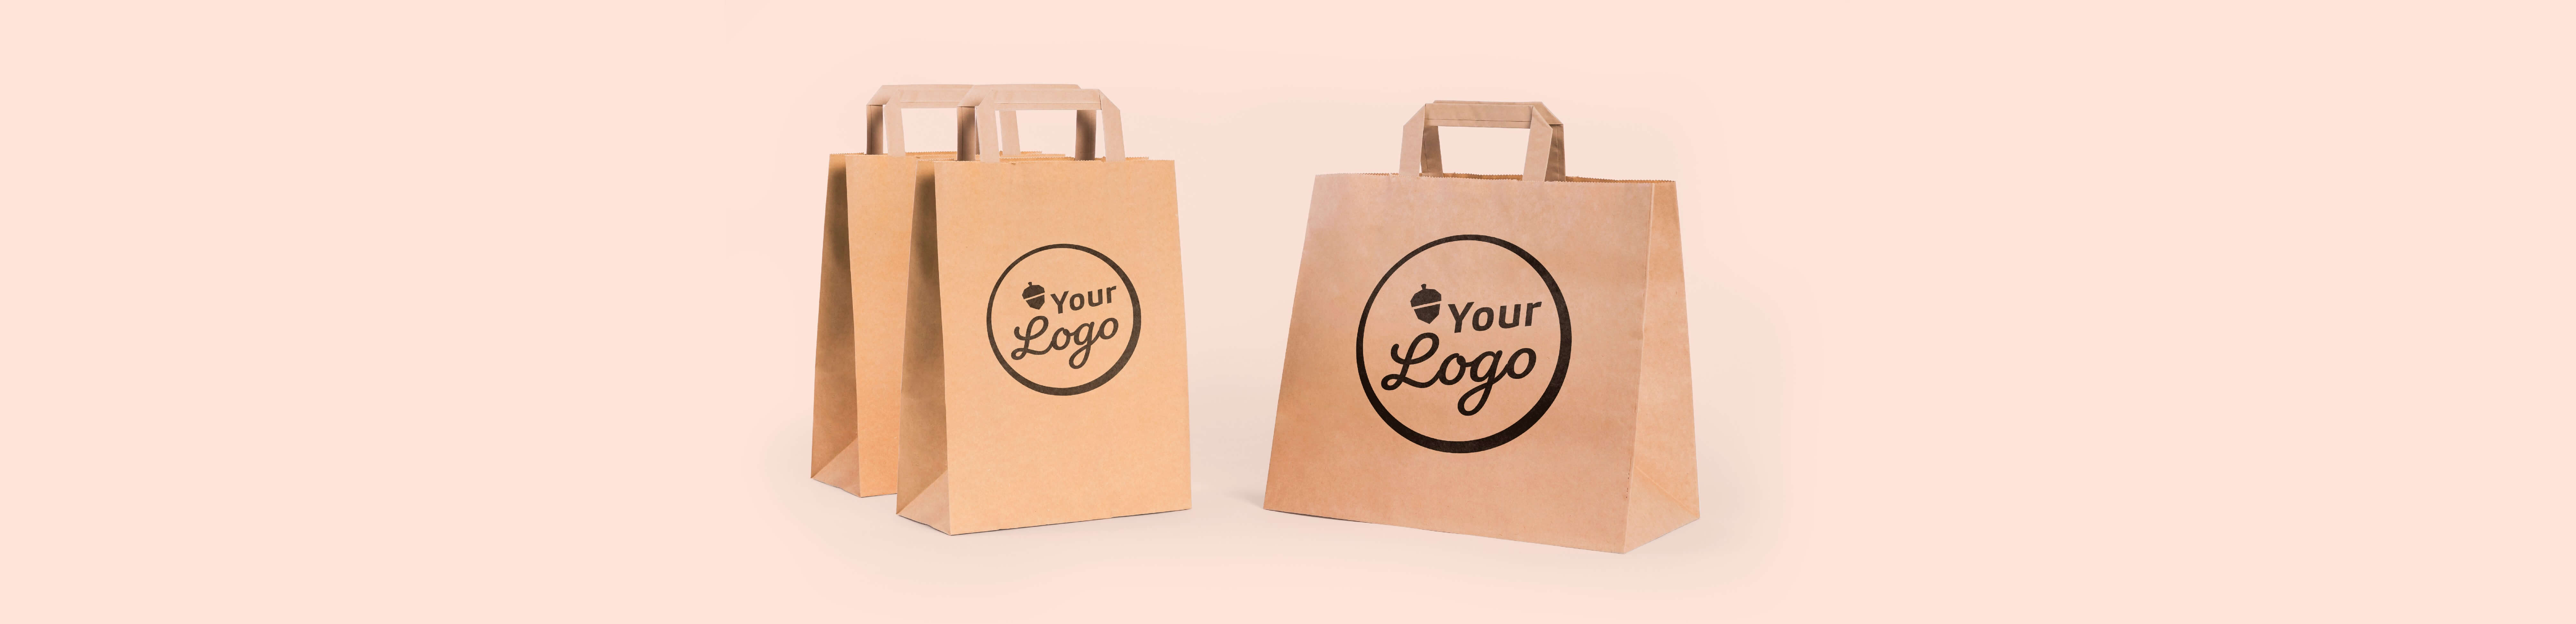 Paper bags and carrier bags